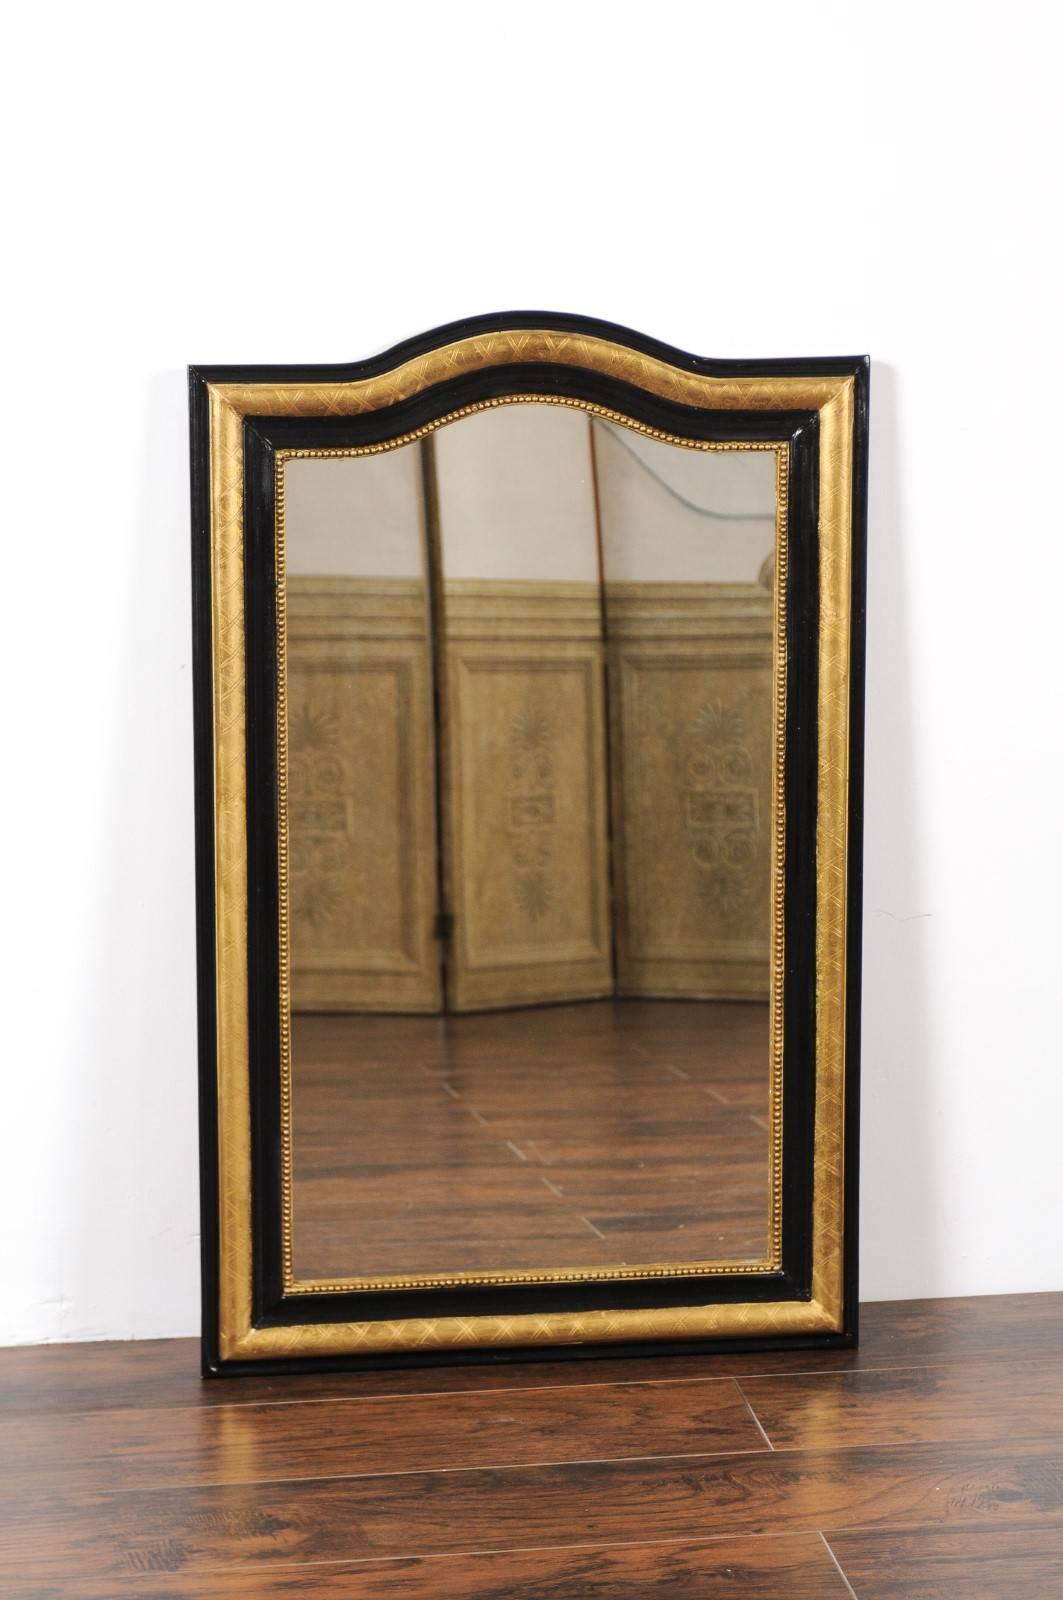 A French ebonized and gilt wooden mirror from the early 20th century with arched top and X-form motifs. This exquisite French mirror features an elegant rectangular silhouette, accented by a delicately arched top. The frame alternates layers of